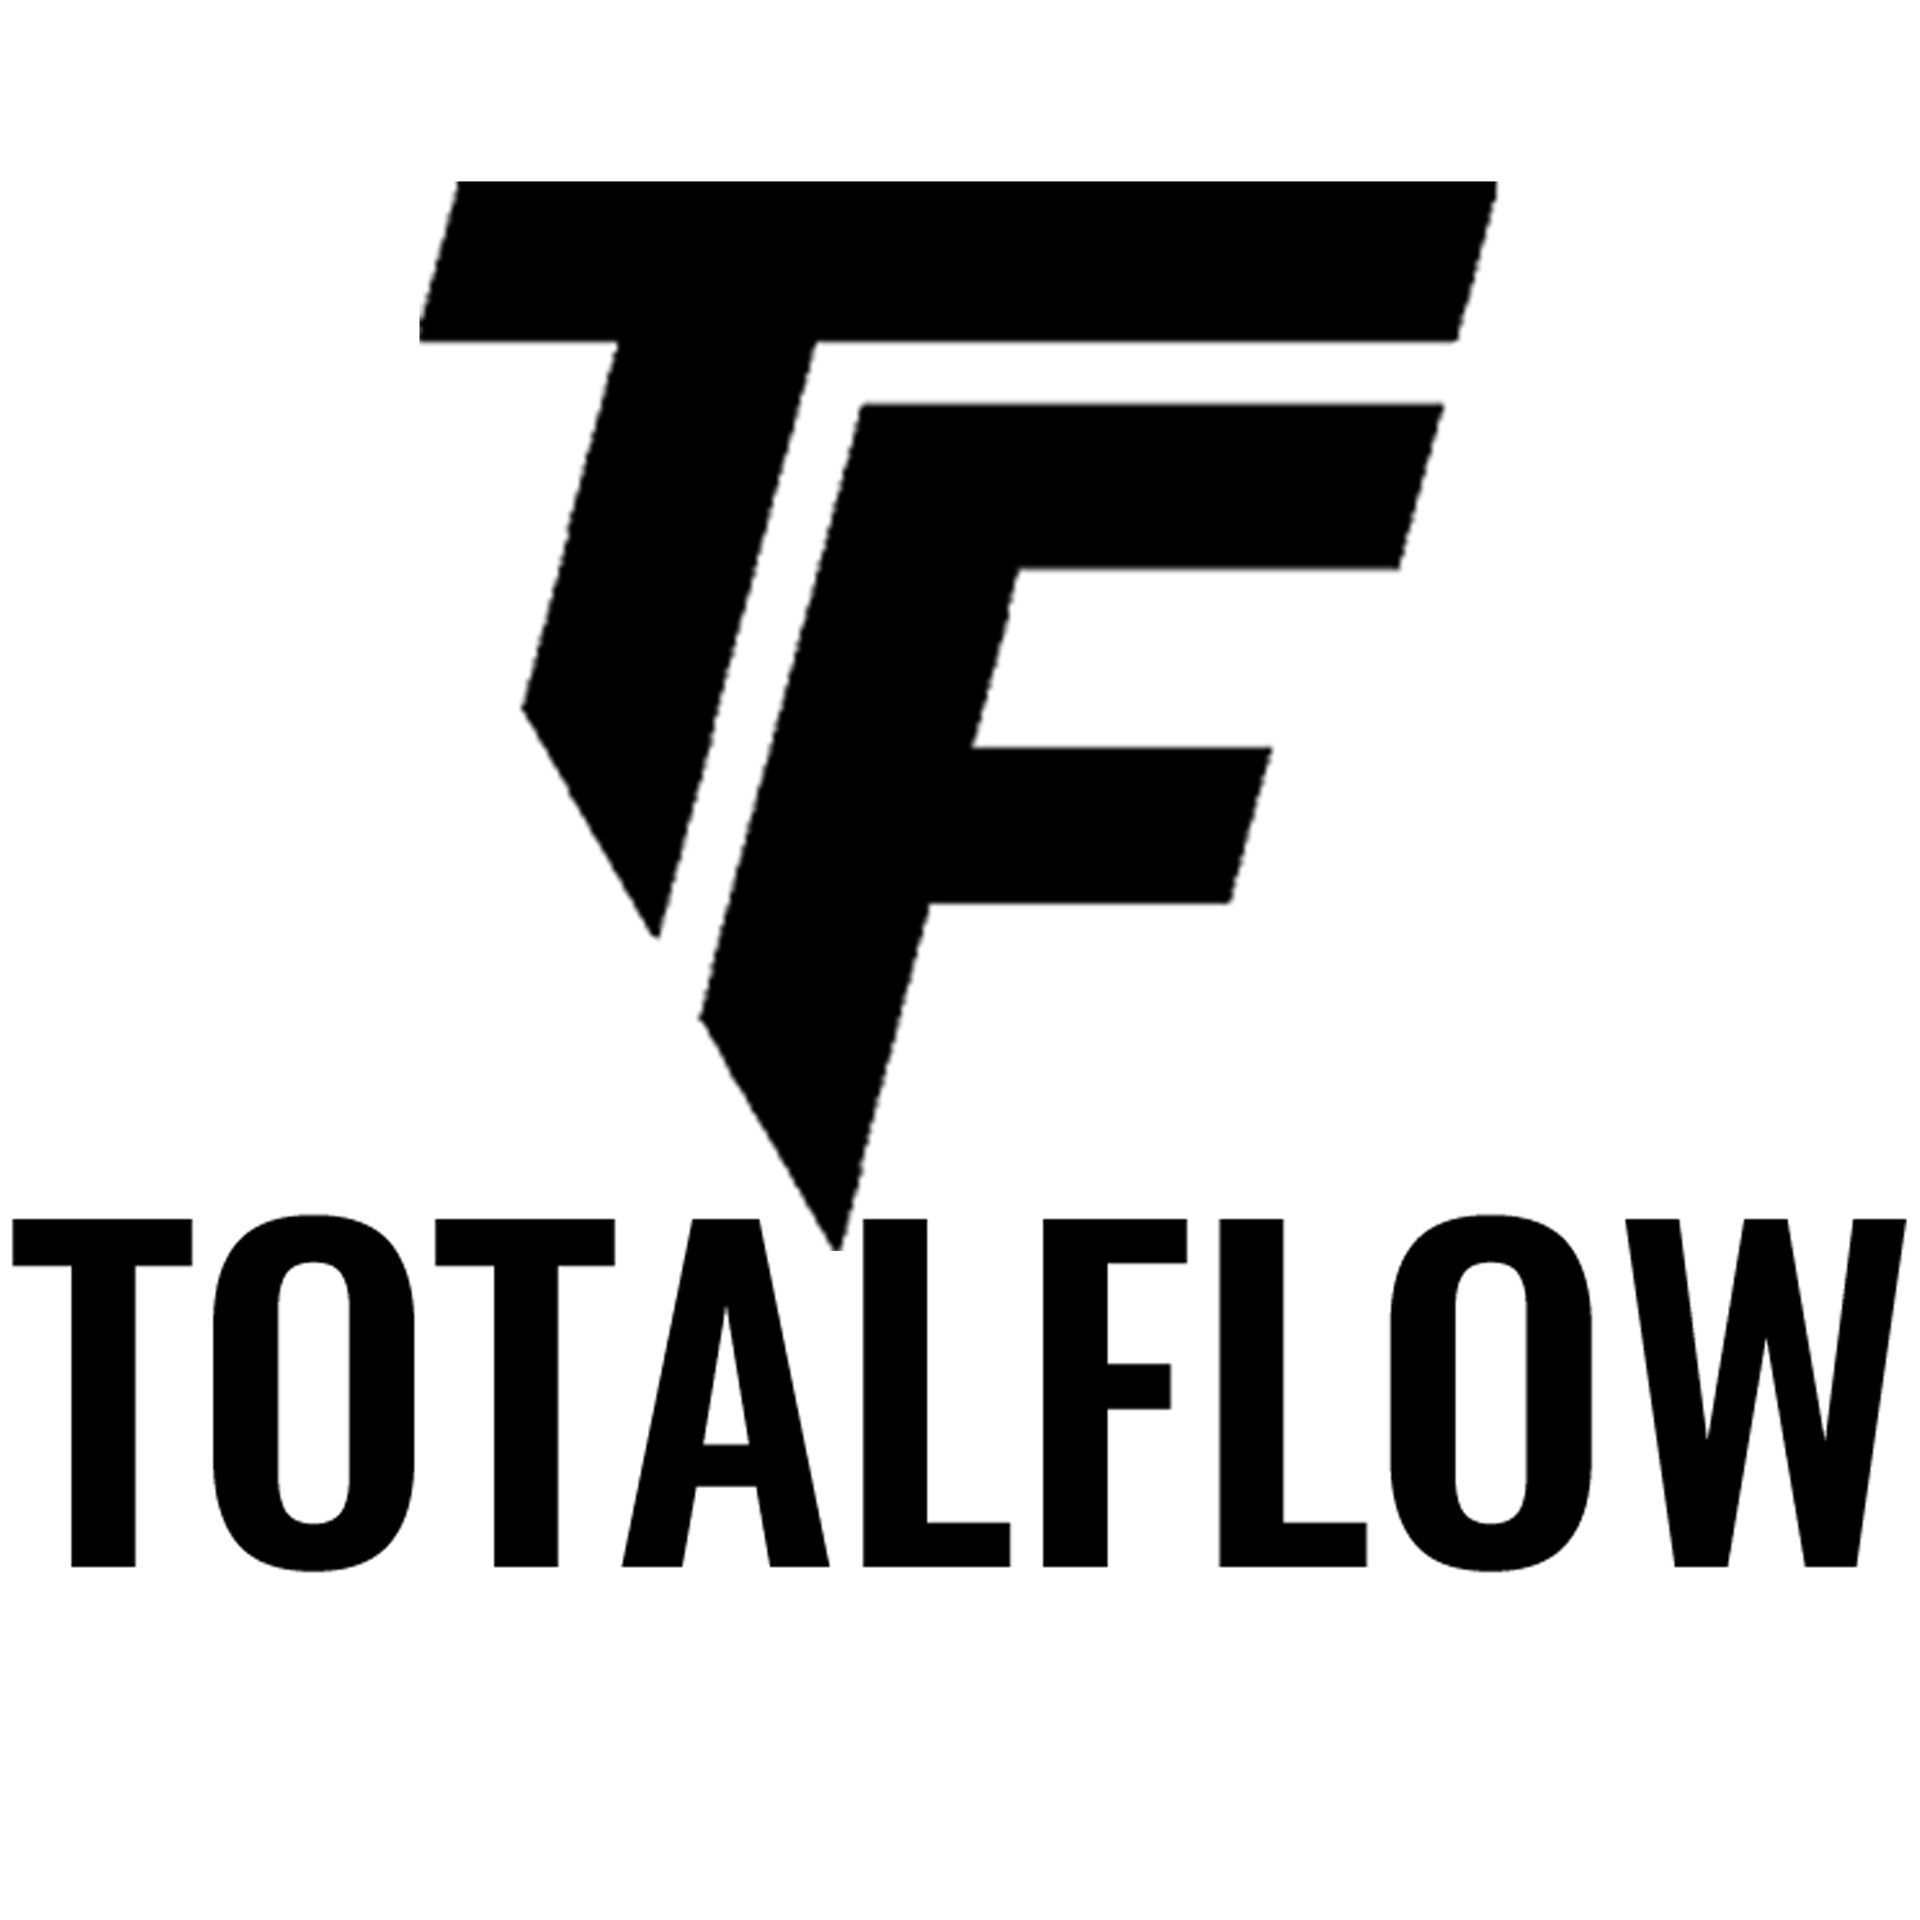 TOTALFLOW TF-N63150S Heavy Duty Double Braided Universal 2-1/2 inch Slotted Ends Exhaust Flex Pipe Connector | 2.5 inch ID